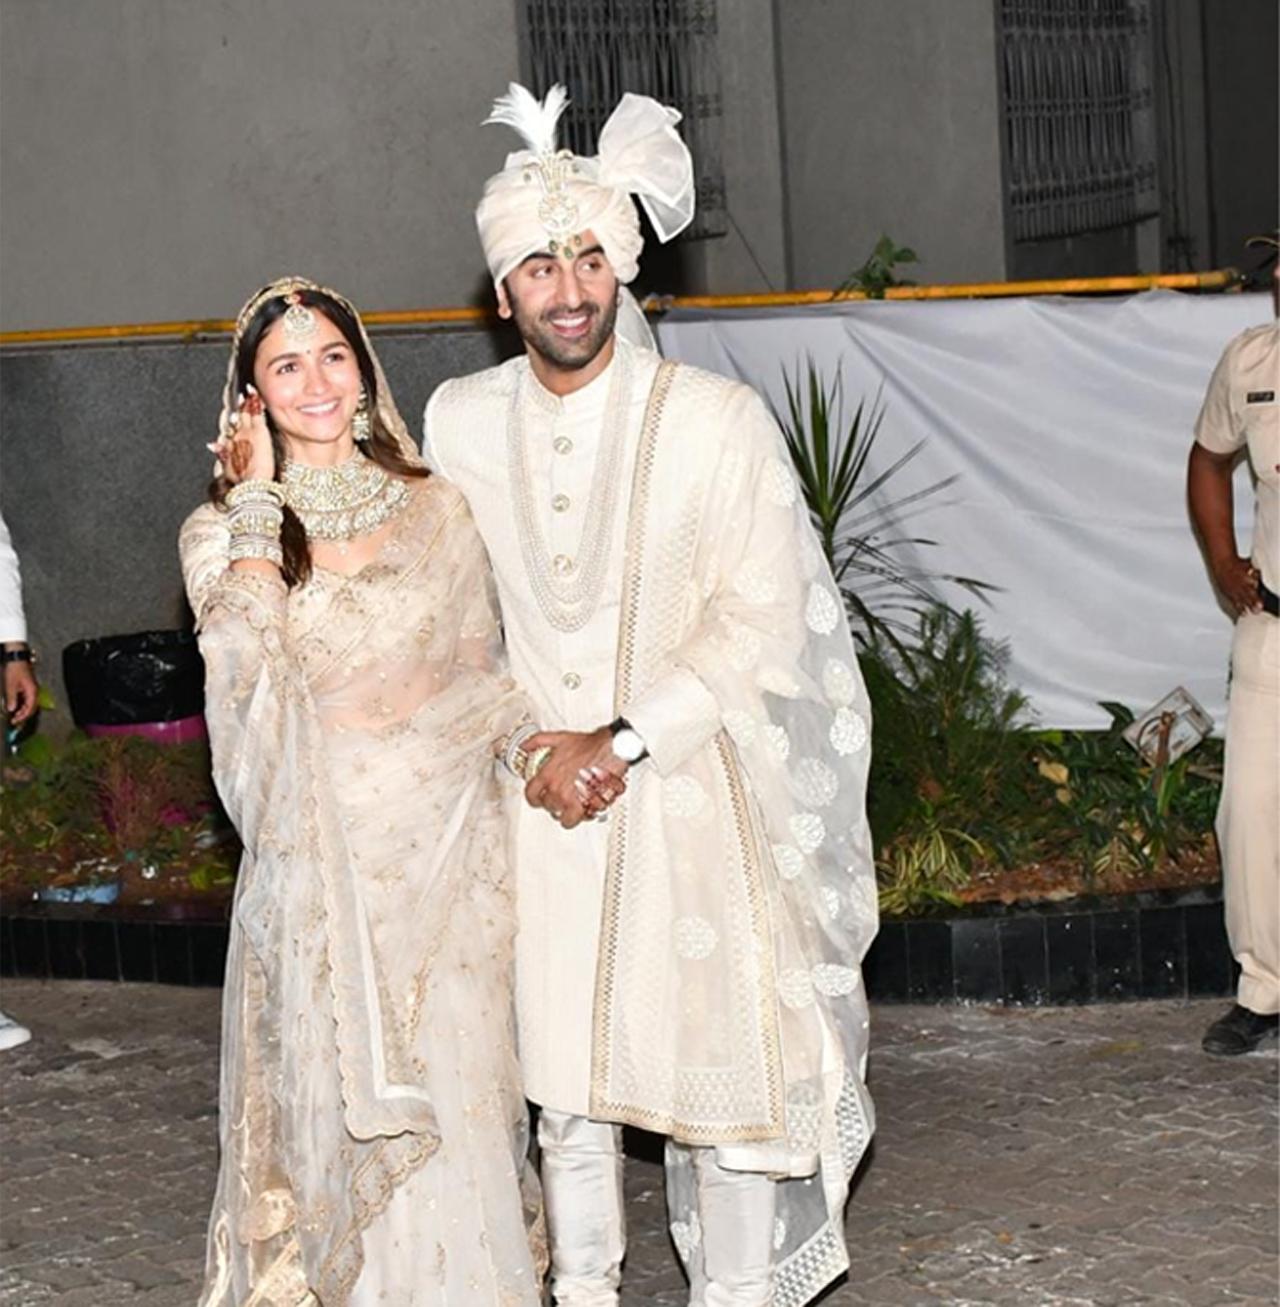 After tying the knot in an intimate ceremony, Ranbir Kapoor and Alia Bhatt came out of their house 'Vastu' and posed for the paparazzi as candidly as one can. The couple was all smiles and in an absolute jovial mood.